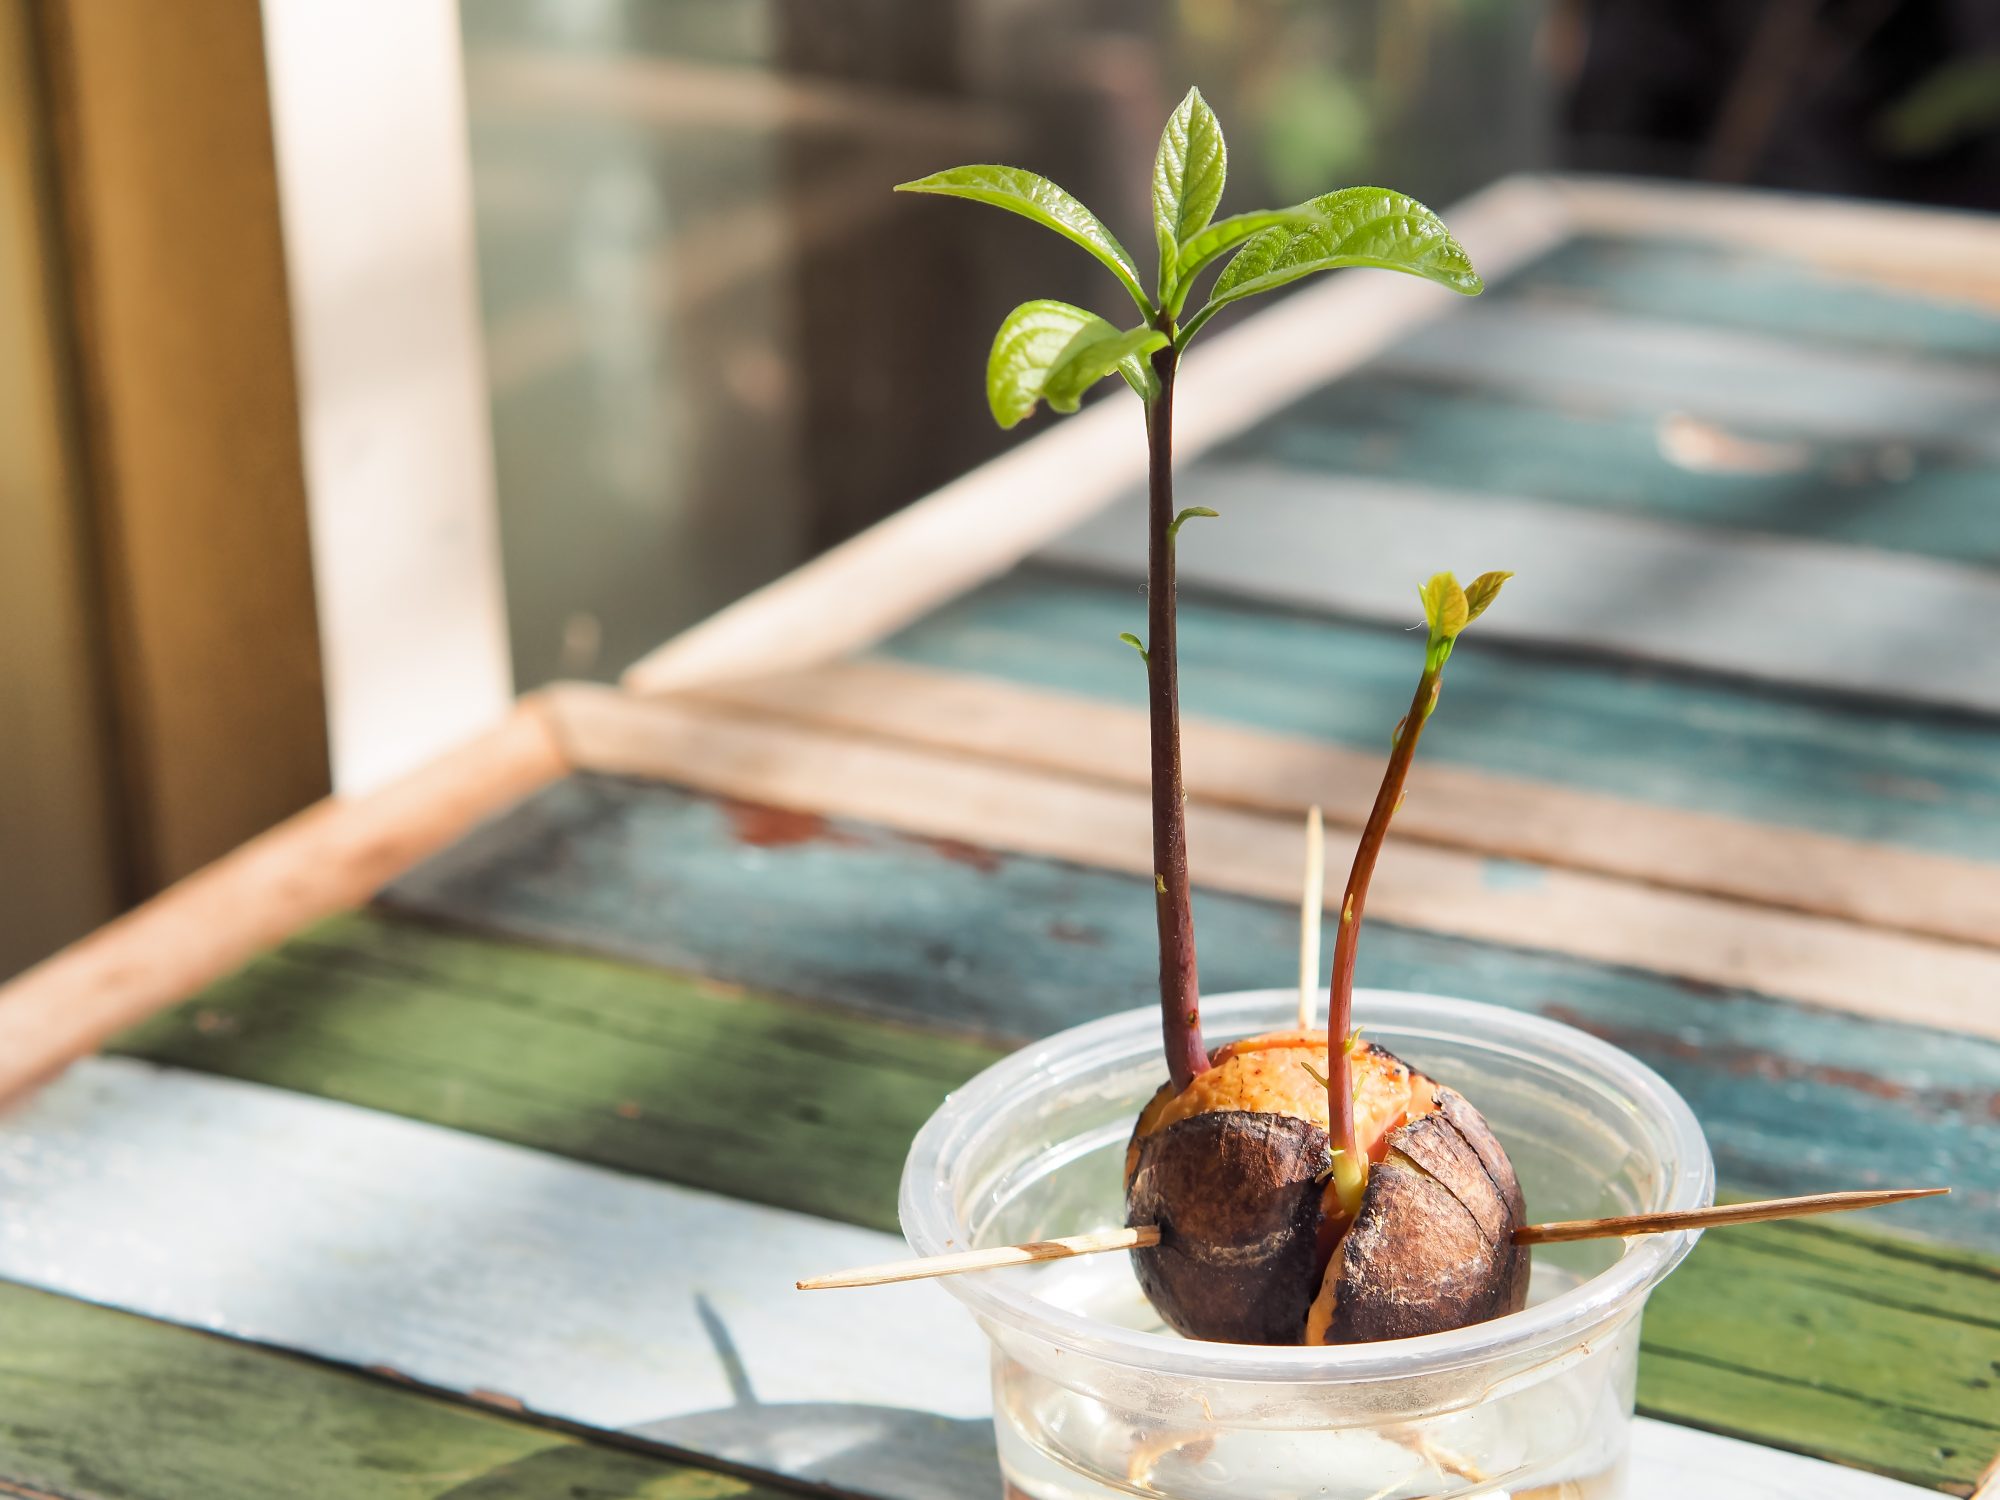 Growing Avocado From Seed - Learn How to Plant Avocado Seed